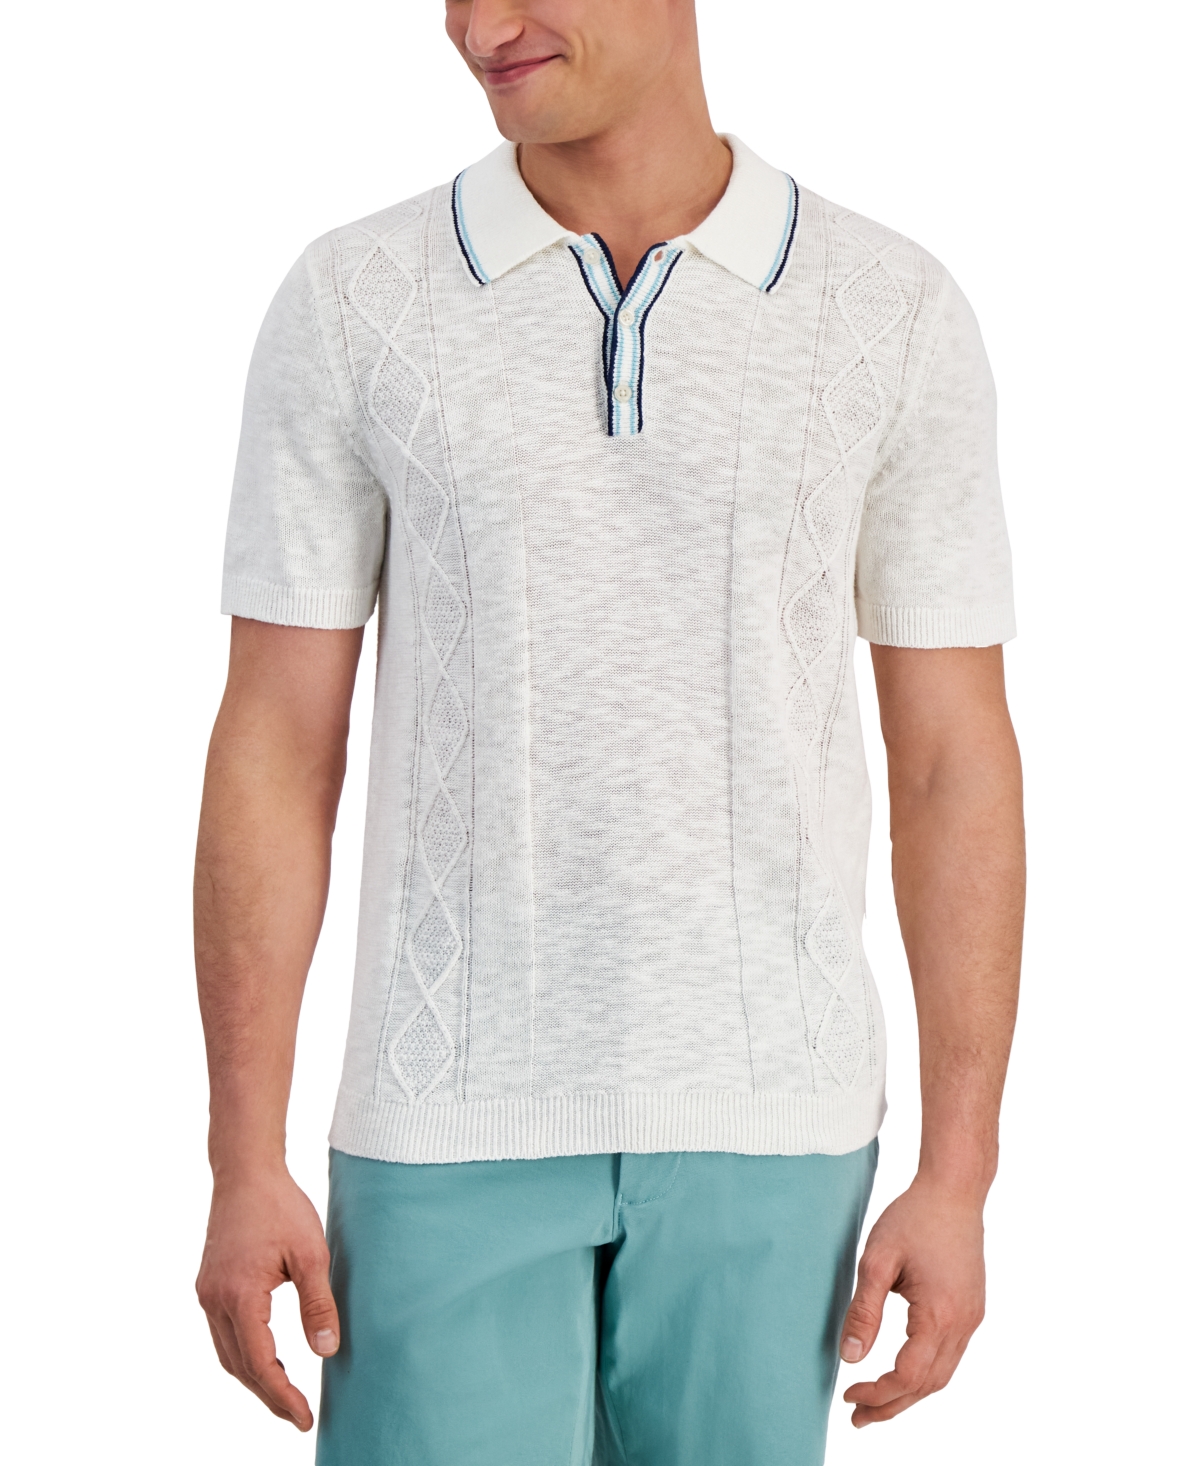 Men's Luxury Sweater Short-Sleeve Polo Shirt, Created for Macy's - Winter Ivory